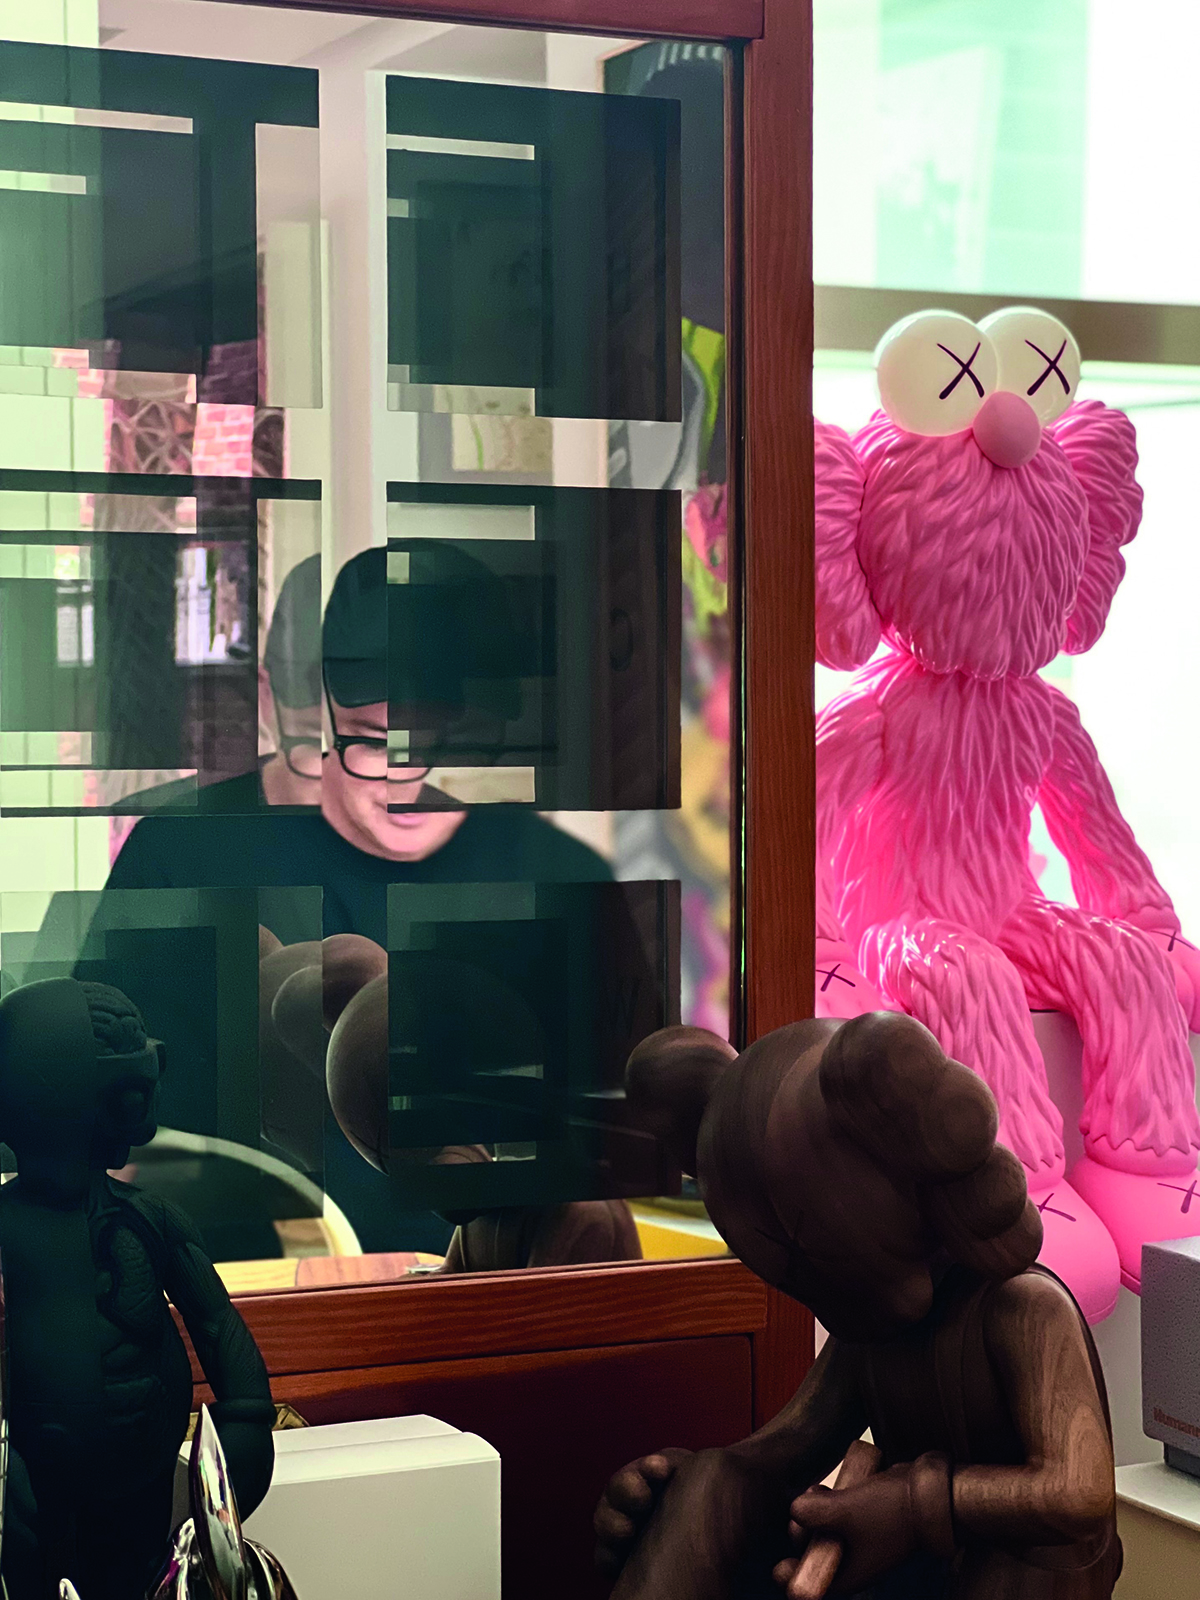 A large pink fluffy toy elephant with big white eyes sitting on a window sill